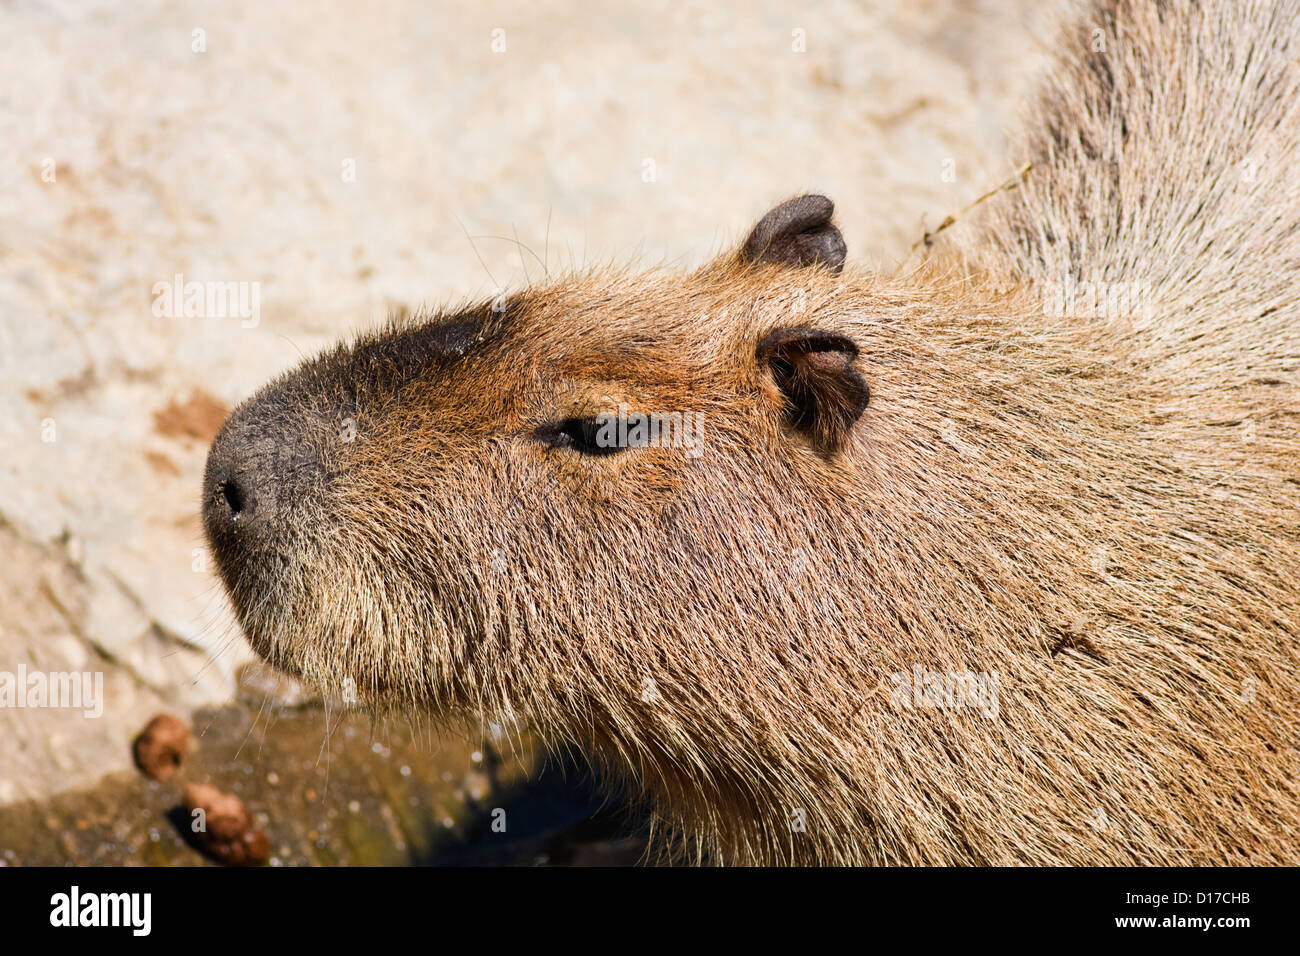 Thailand, Chang Mai, Chang Mai zoo, Capybara (Hydrochaeris hydrochaeris), the world's largest rodent, common in South America Stock Photo